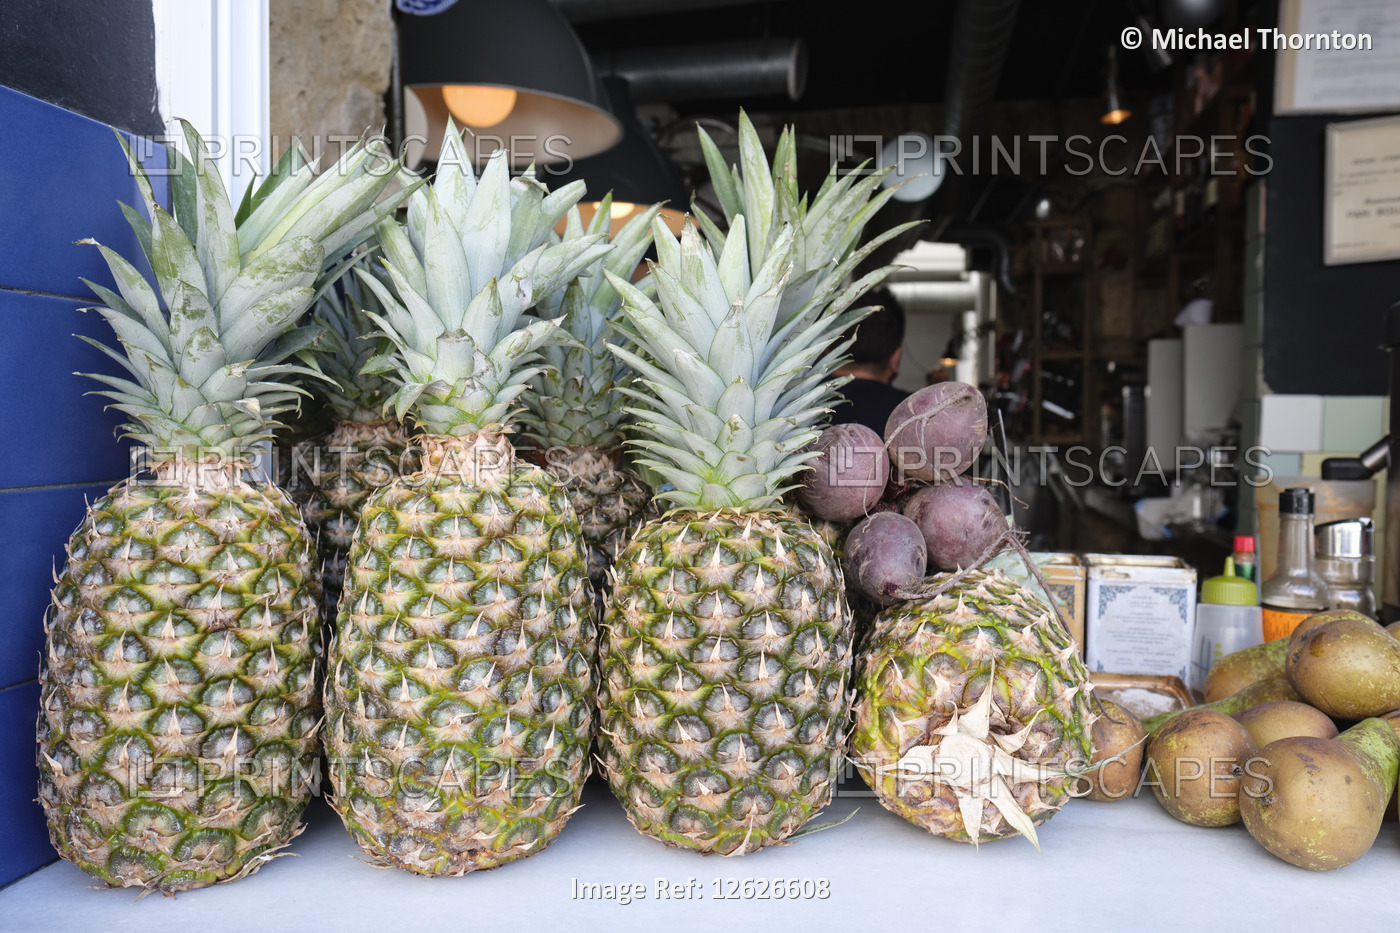 Pineapples on shop window cill, Old Town, Cordoba, Andalucia, Spain, Europe,